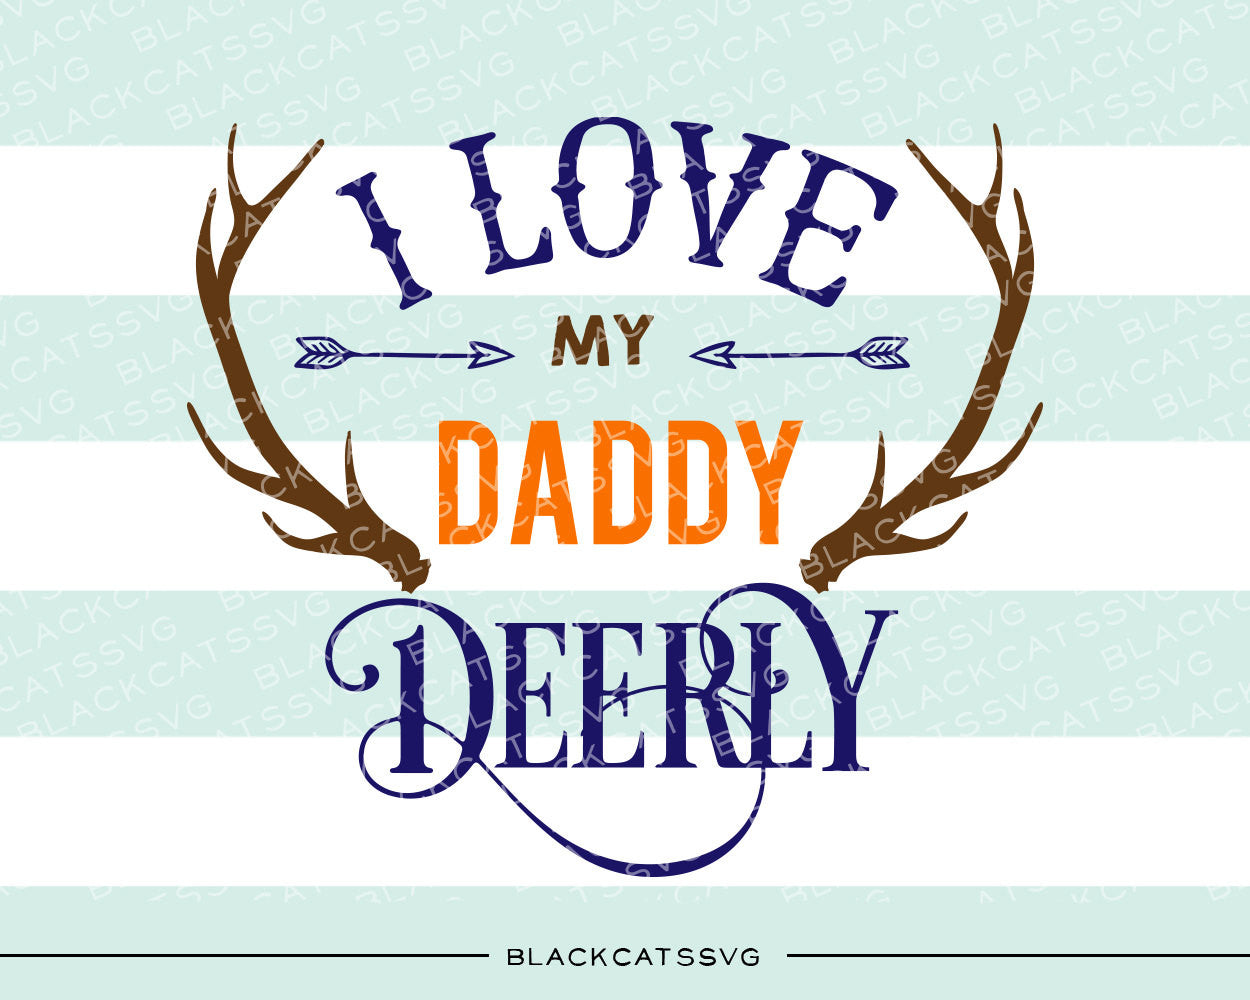 I love my daddy deerly - SVG file Cutting File Clipart in ...